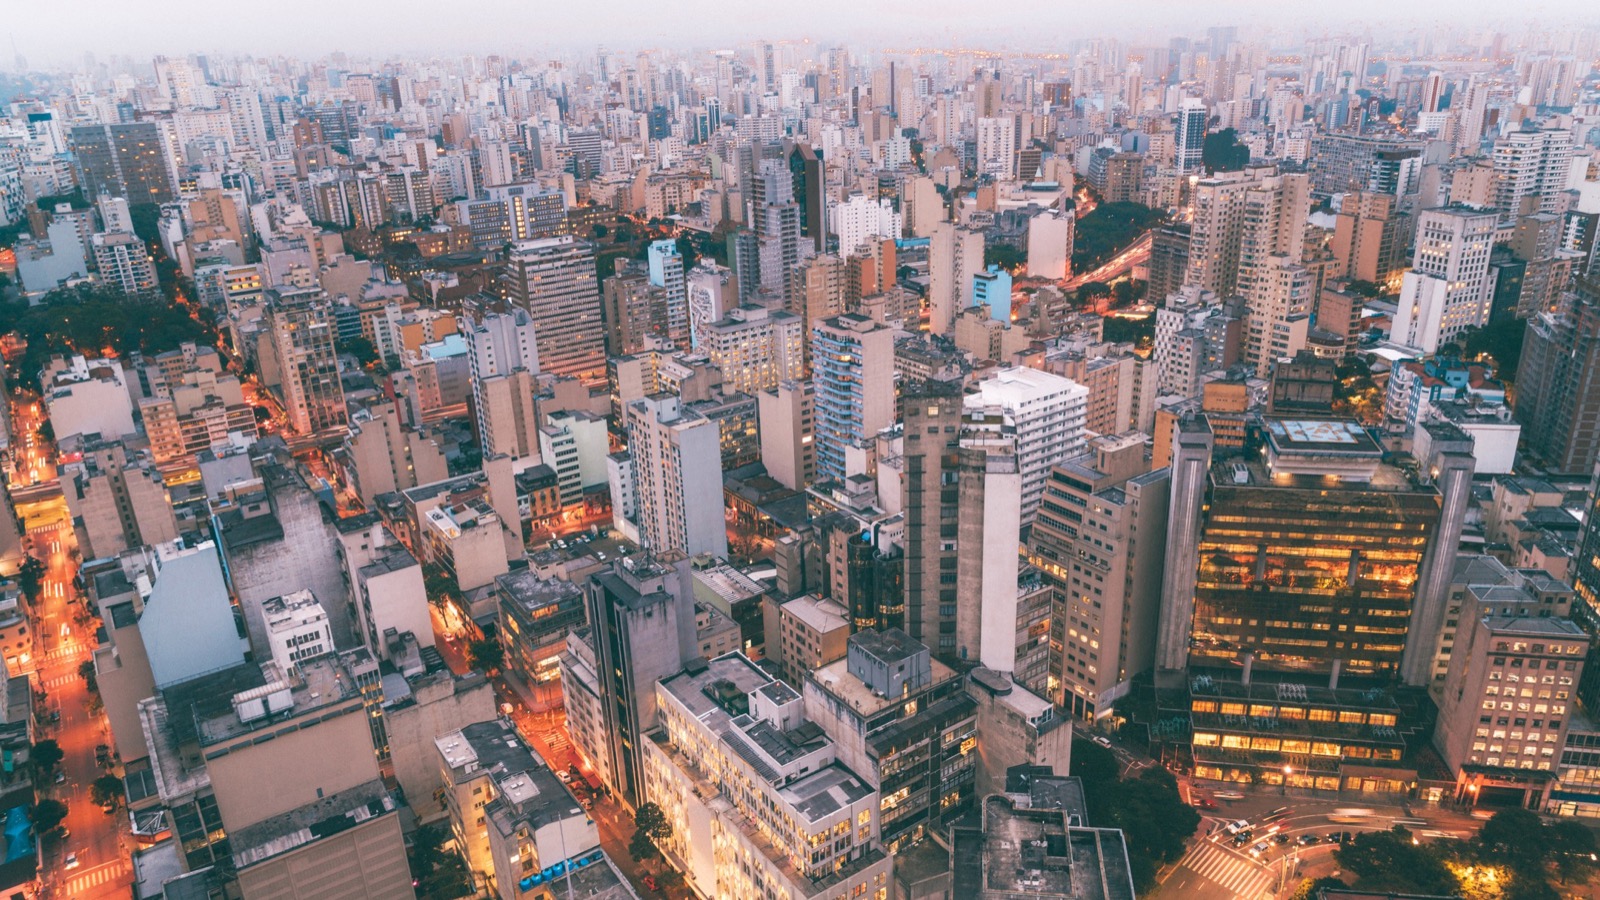 If We Give You a Hint, Can You Name the Most Populated Cities in the World? Sao Paulo, Brazil